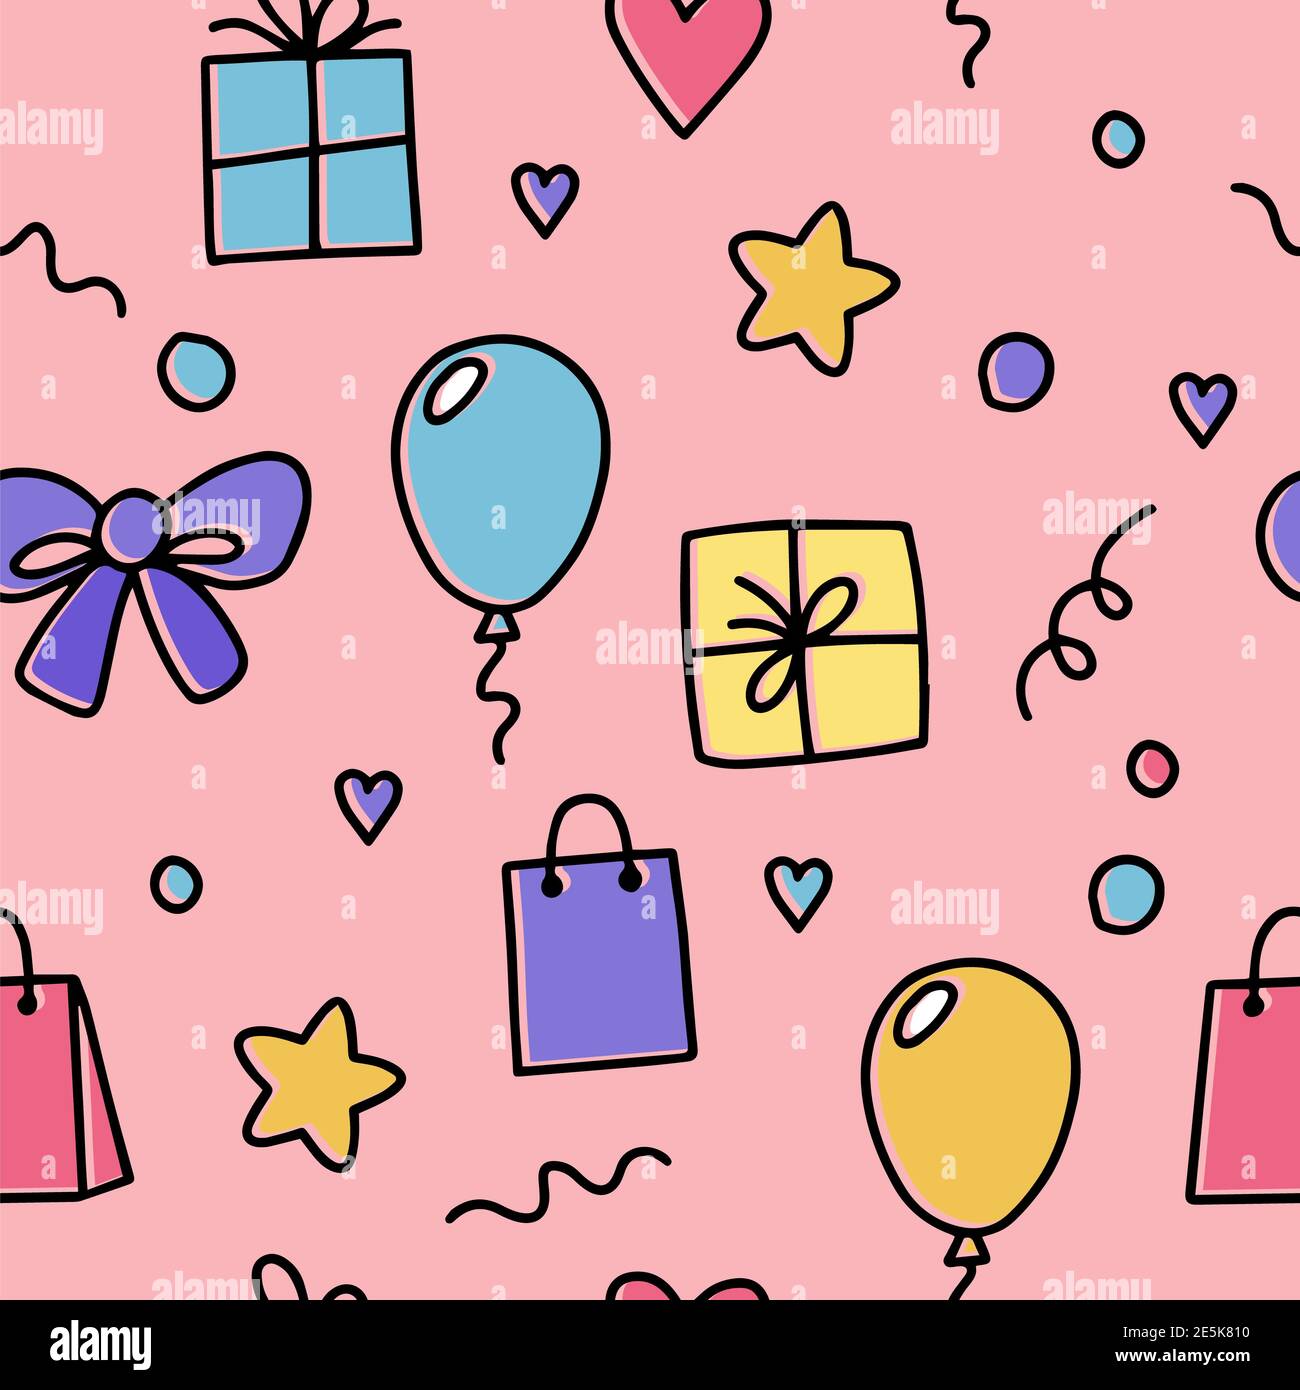 Gifts seamless pattern with doodle illustration Stock Photo